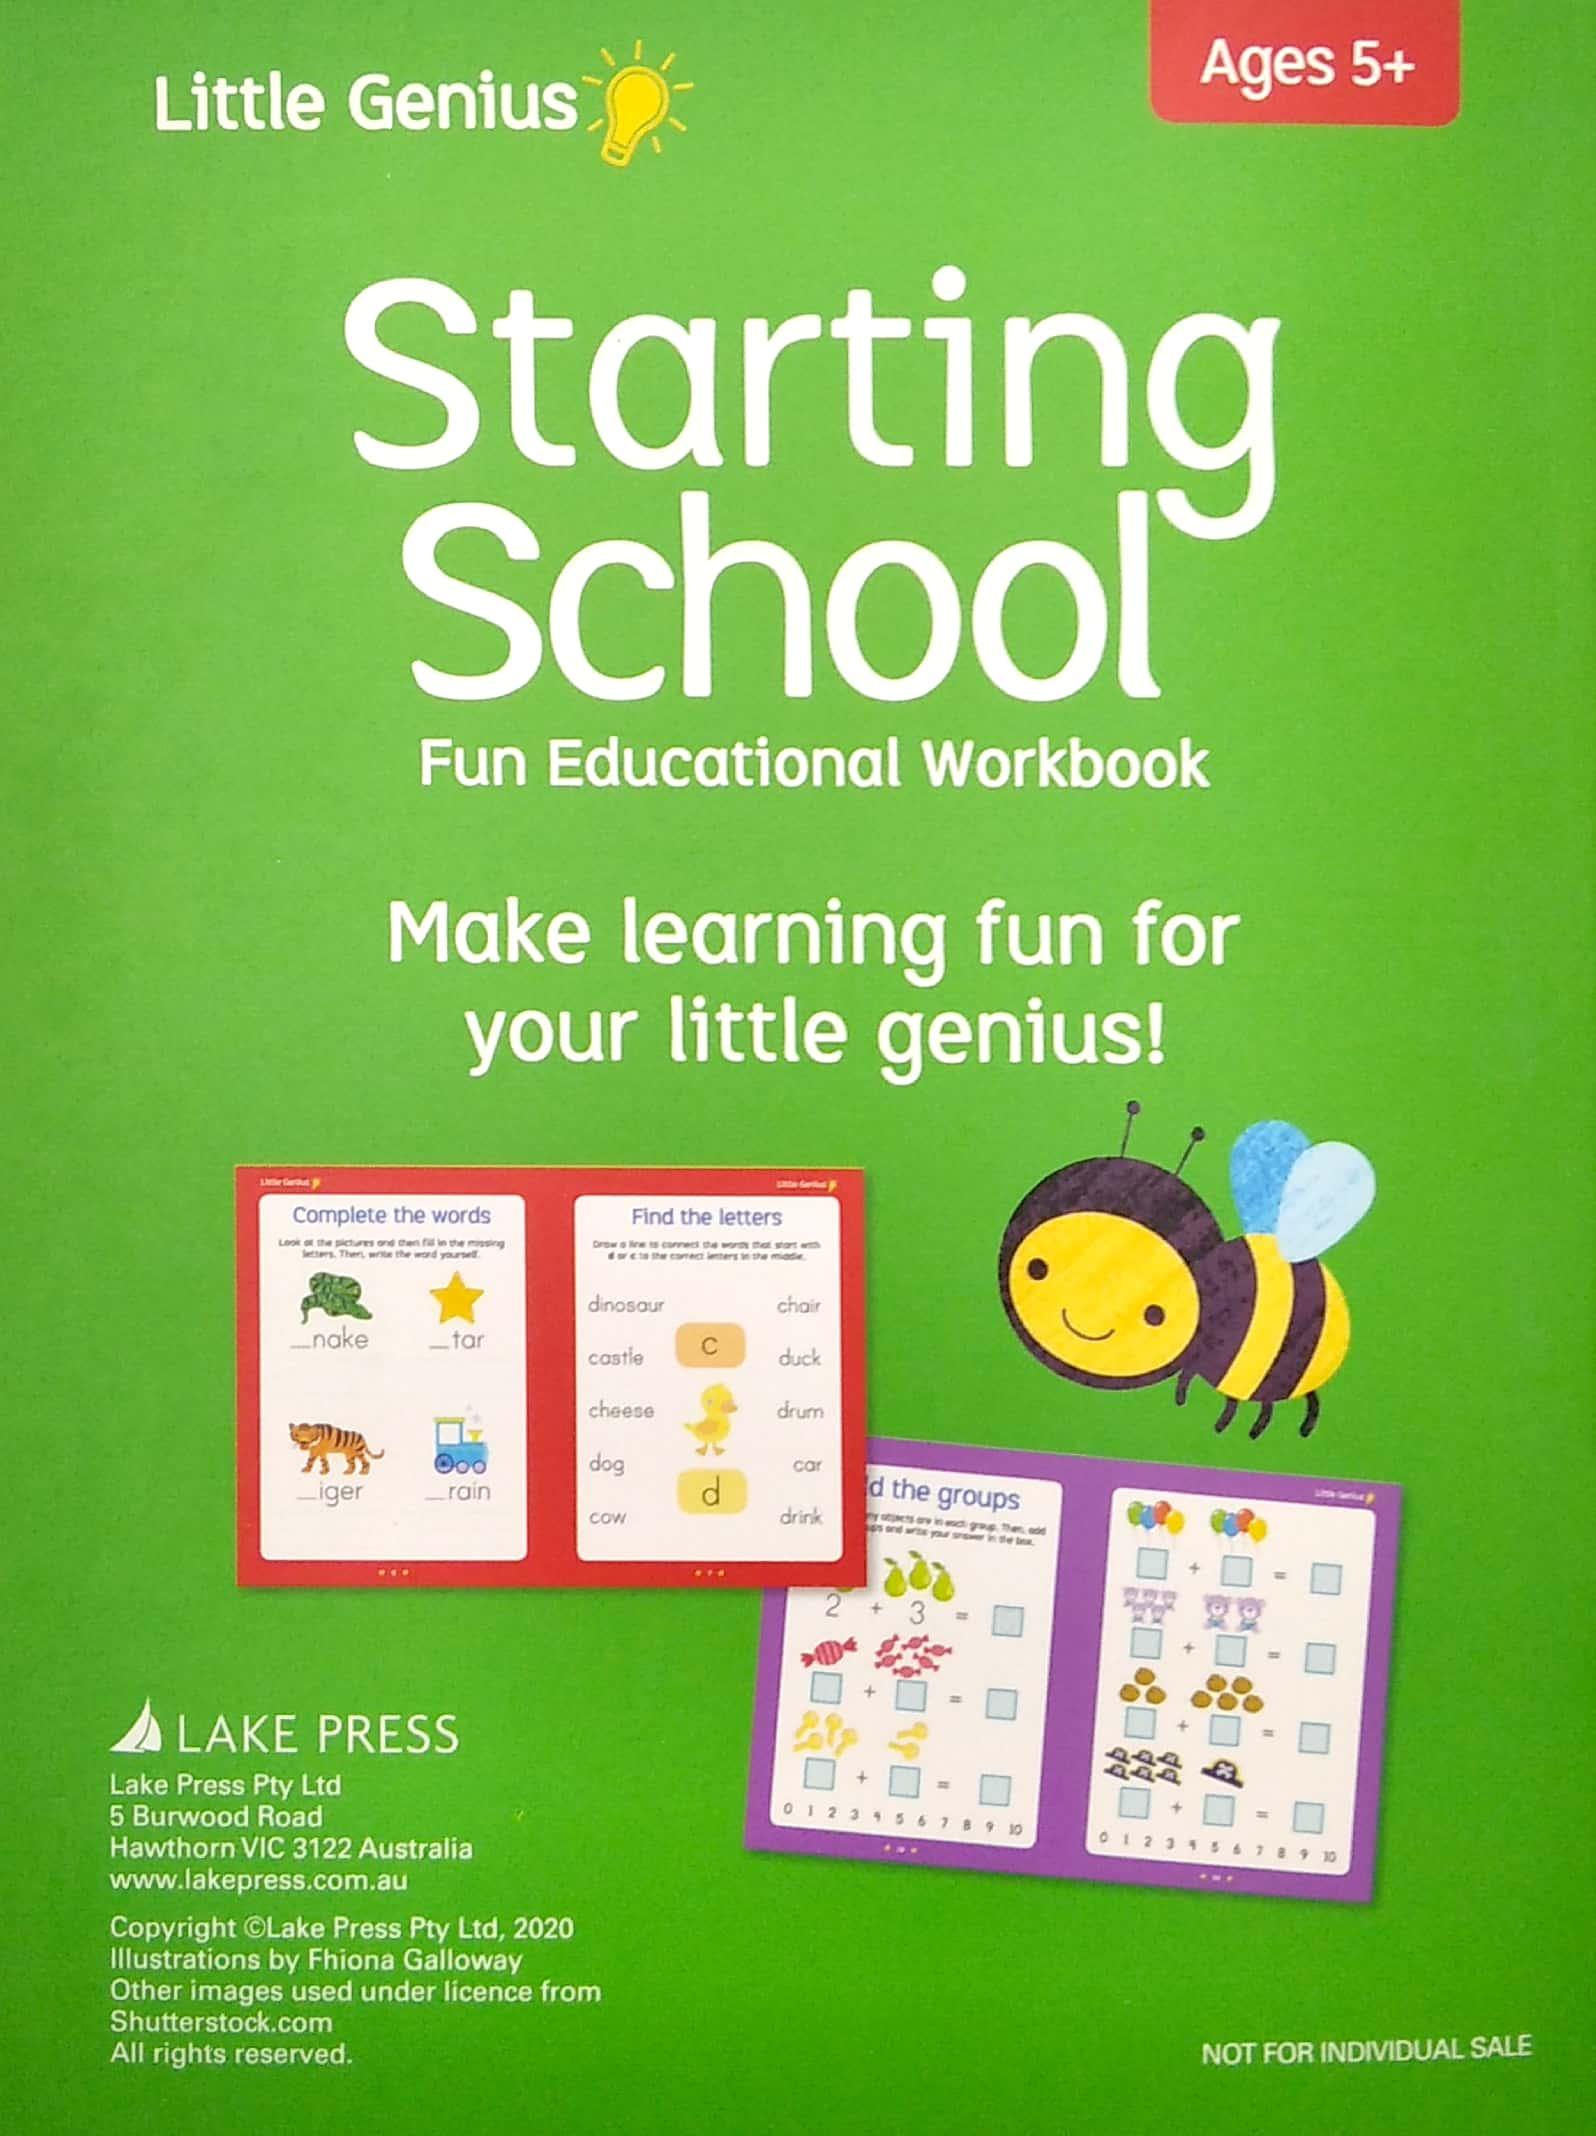 Little Genius: Starting School Early Learning Educational Puzzle Box